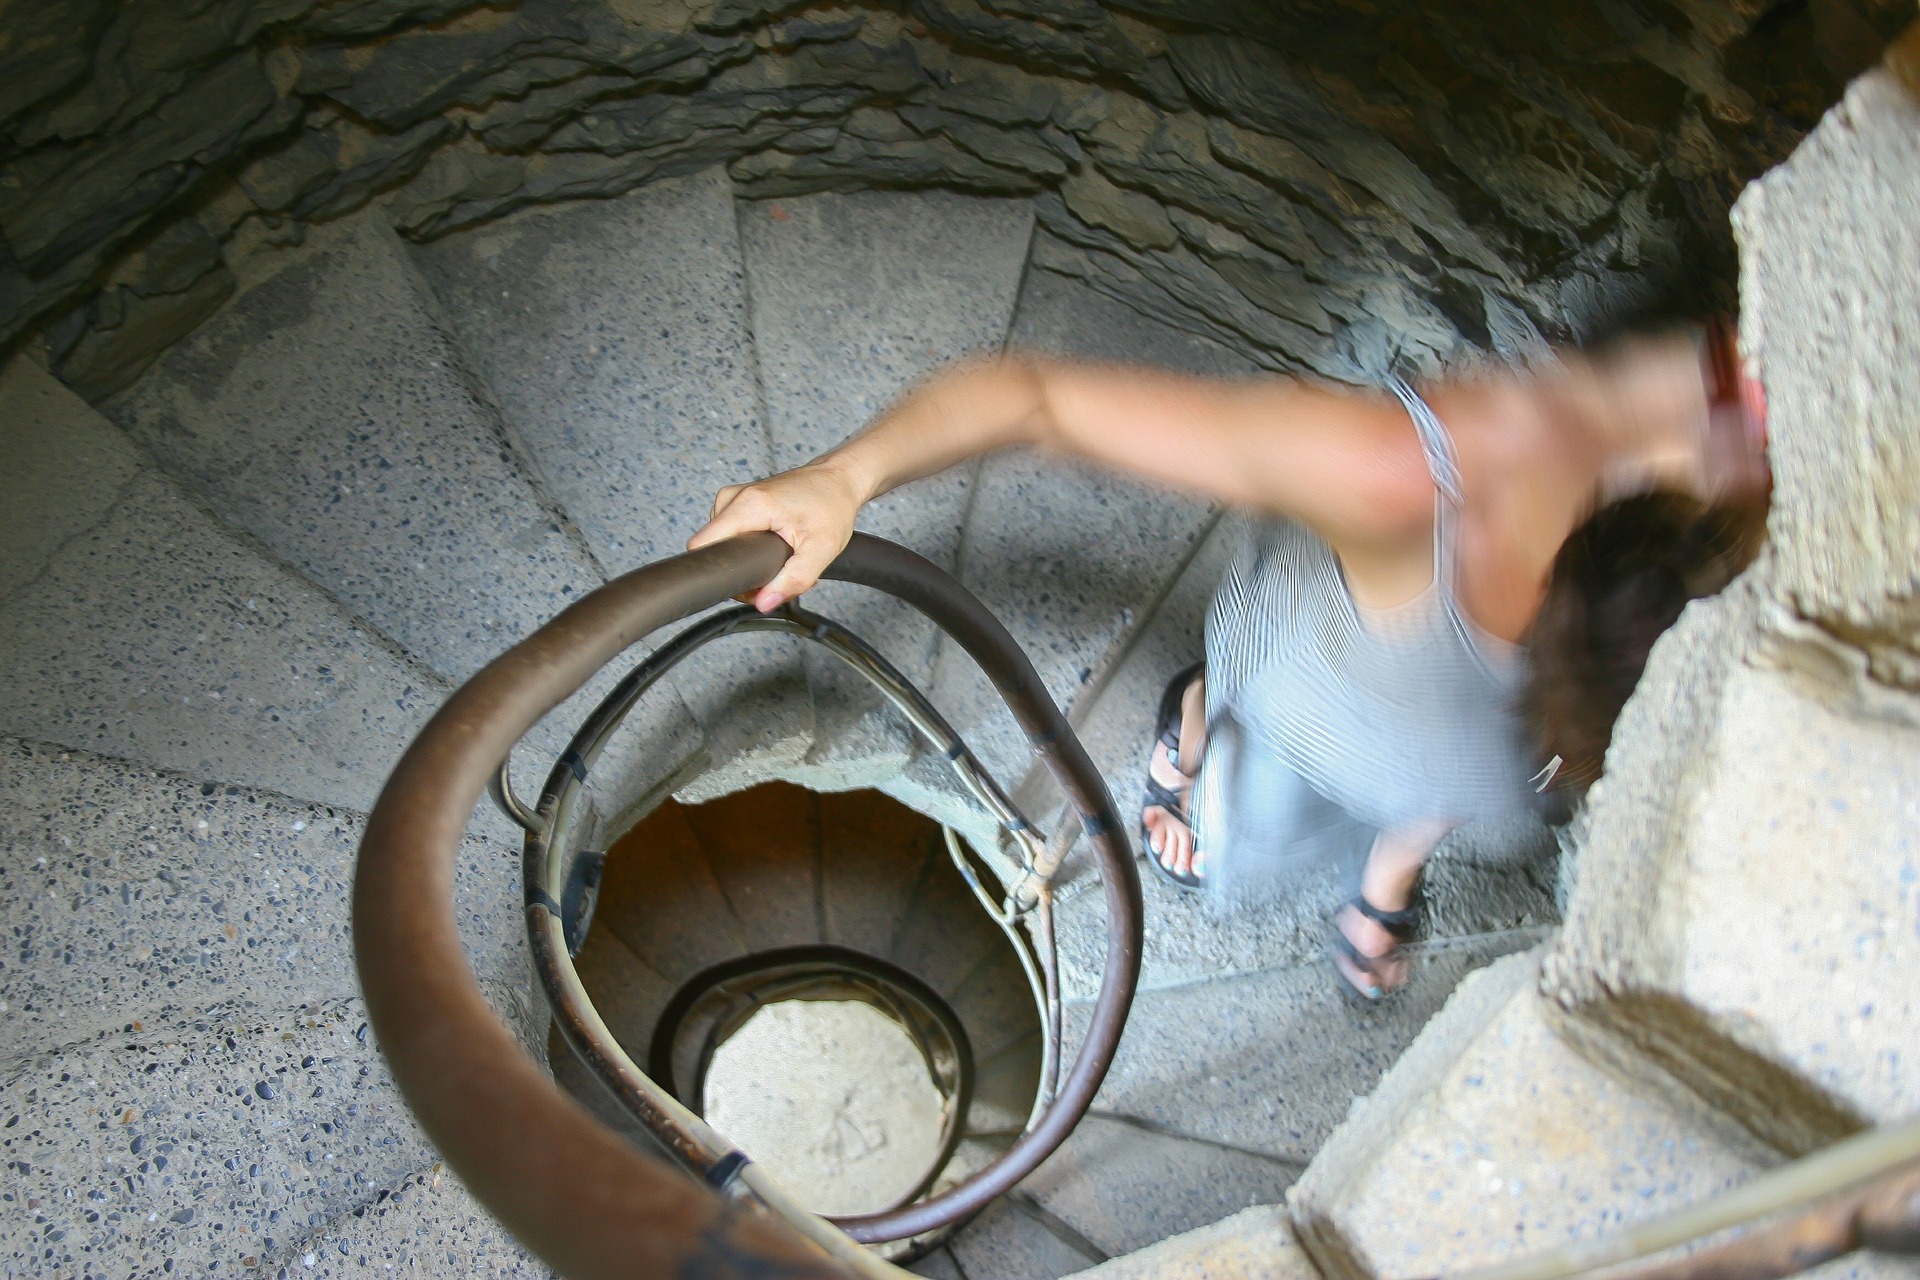 A person gripping the hand rail while running down a spiral staircase.